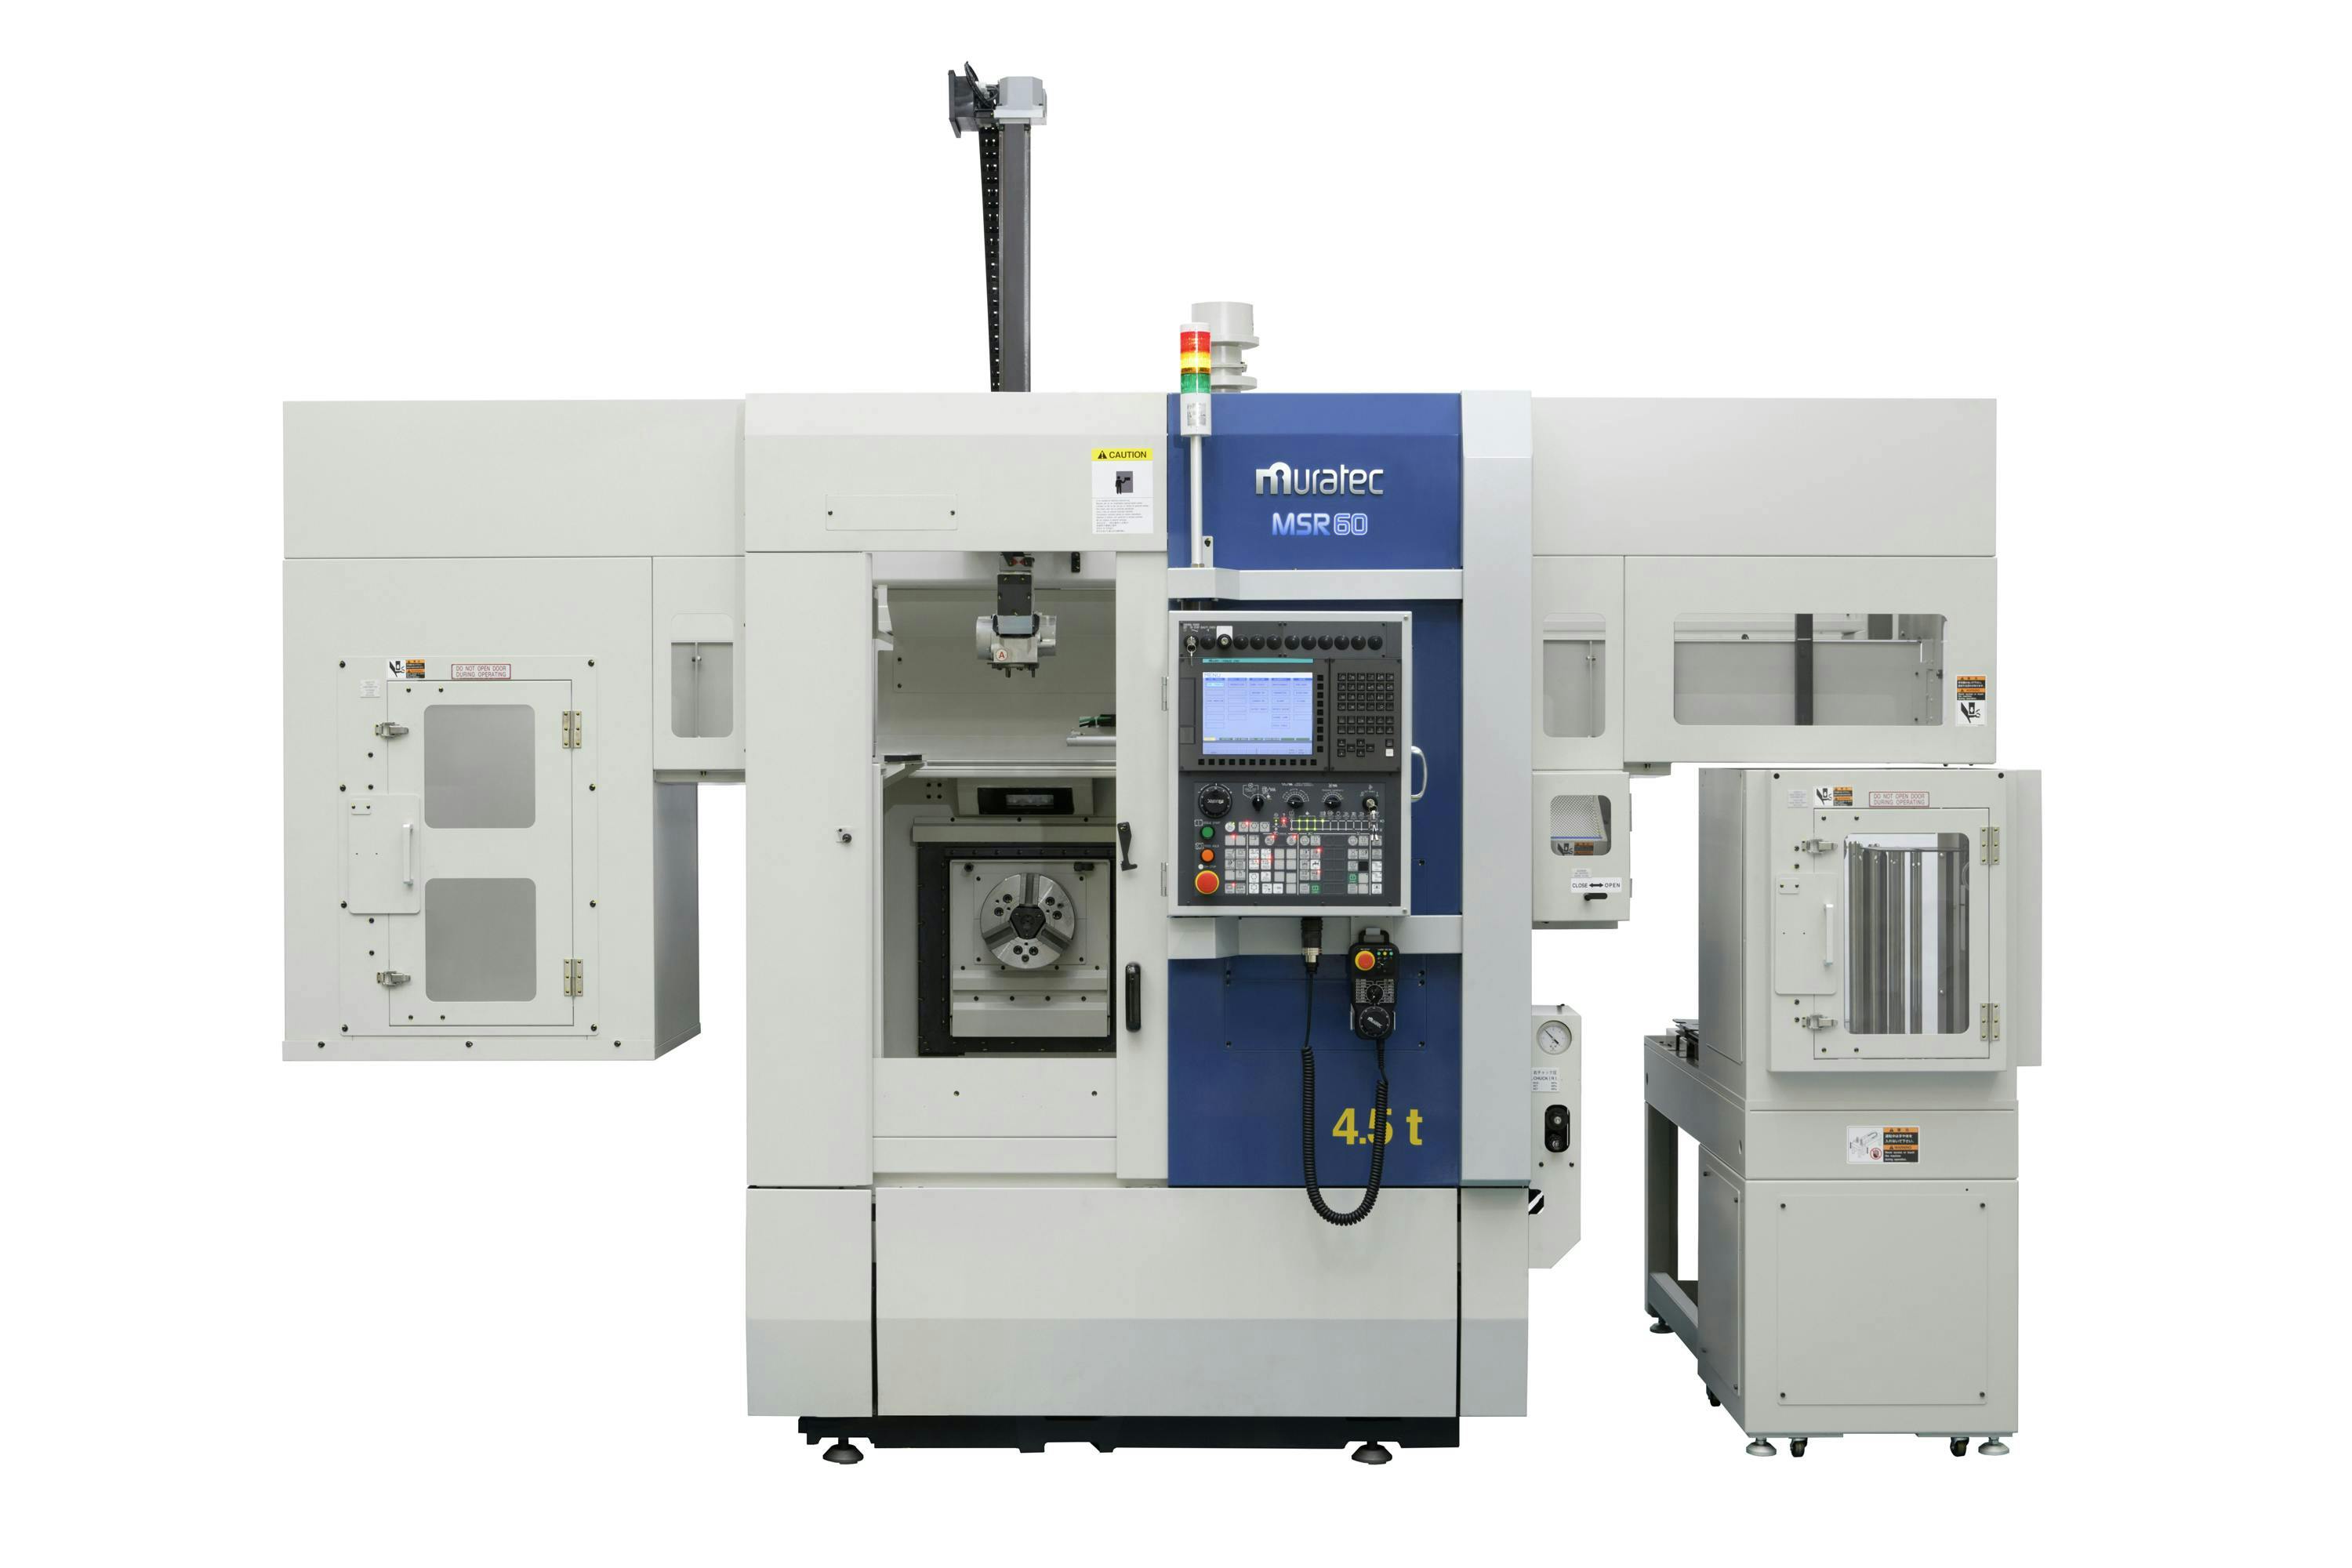 Figure 1: The MSR60 introduces Y-axis and milling capabilities on a single-spindle machine.